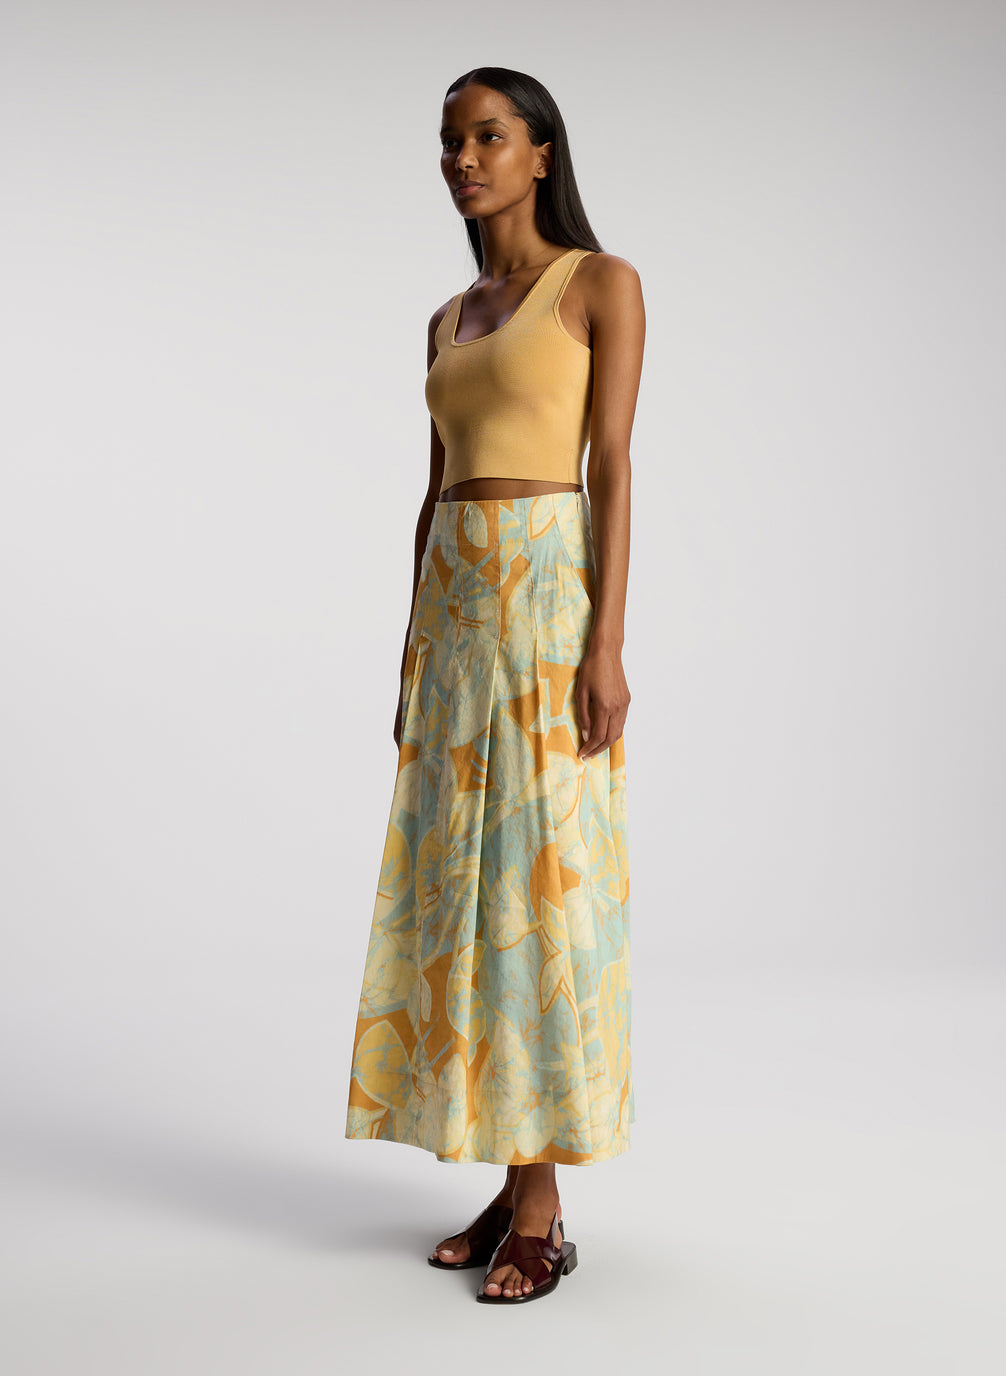 side view of woman wearing tan sleeveless top with multicolor printed midi skirt